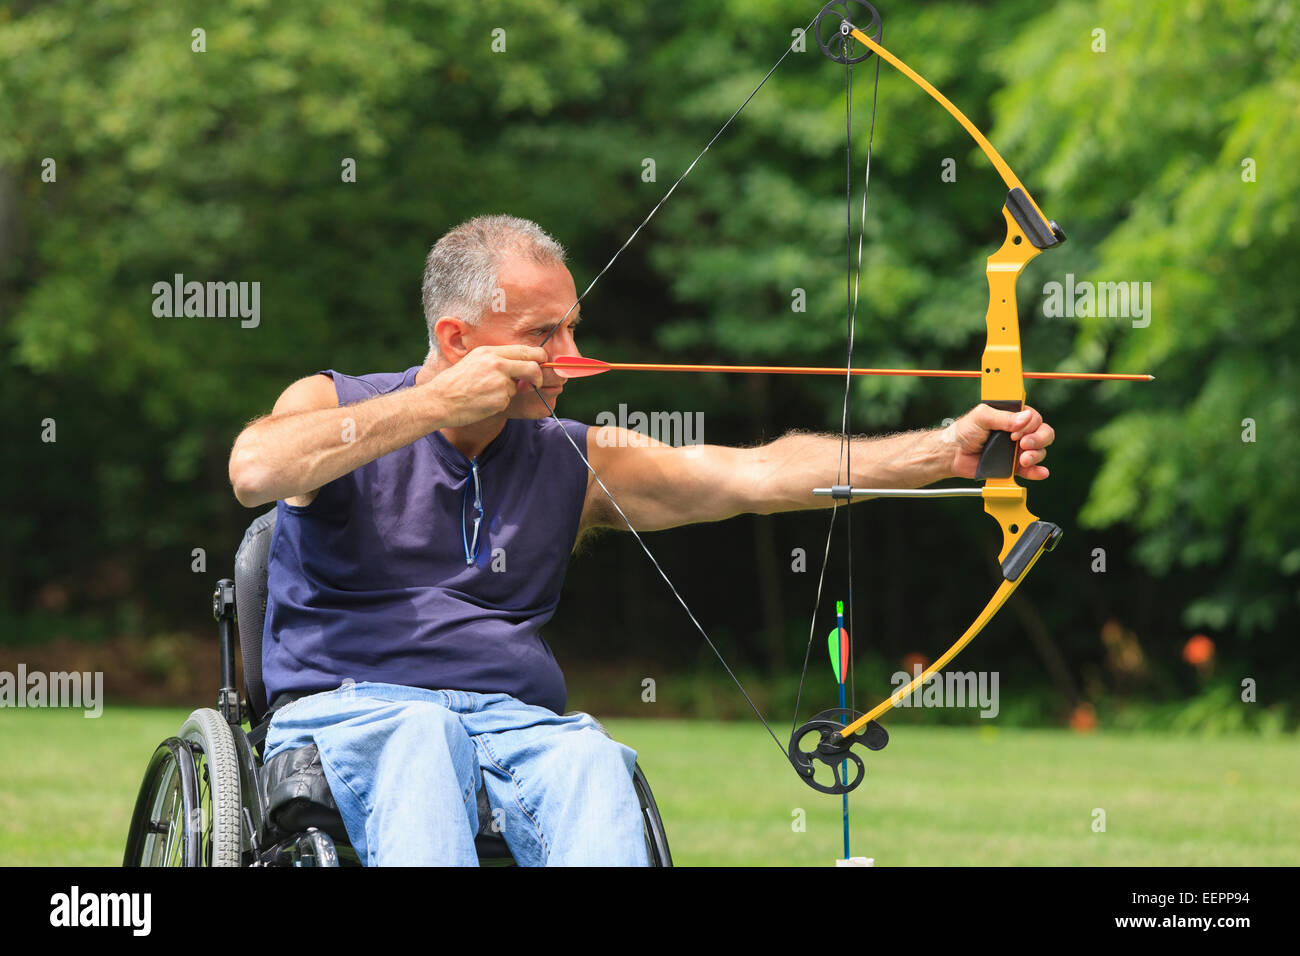 Man with spinal cord injury in wheelchair aiming his bow and arrow for archery practice Stock Photo